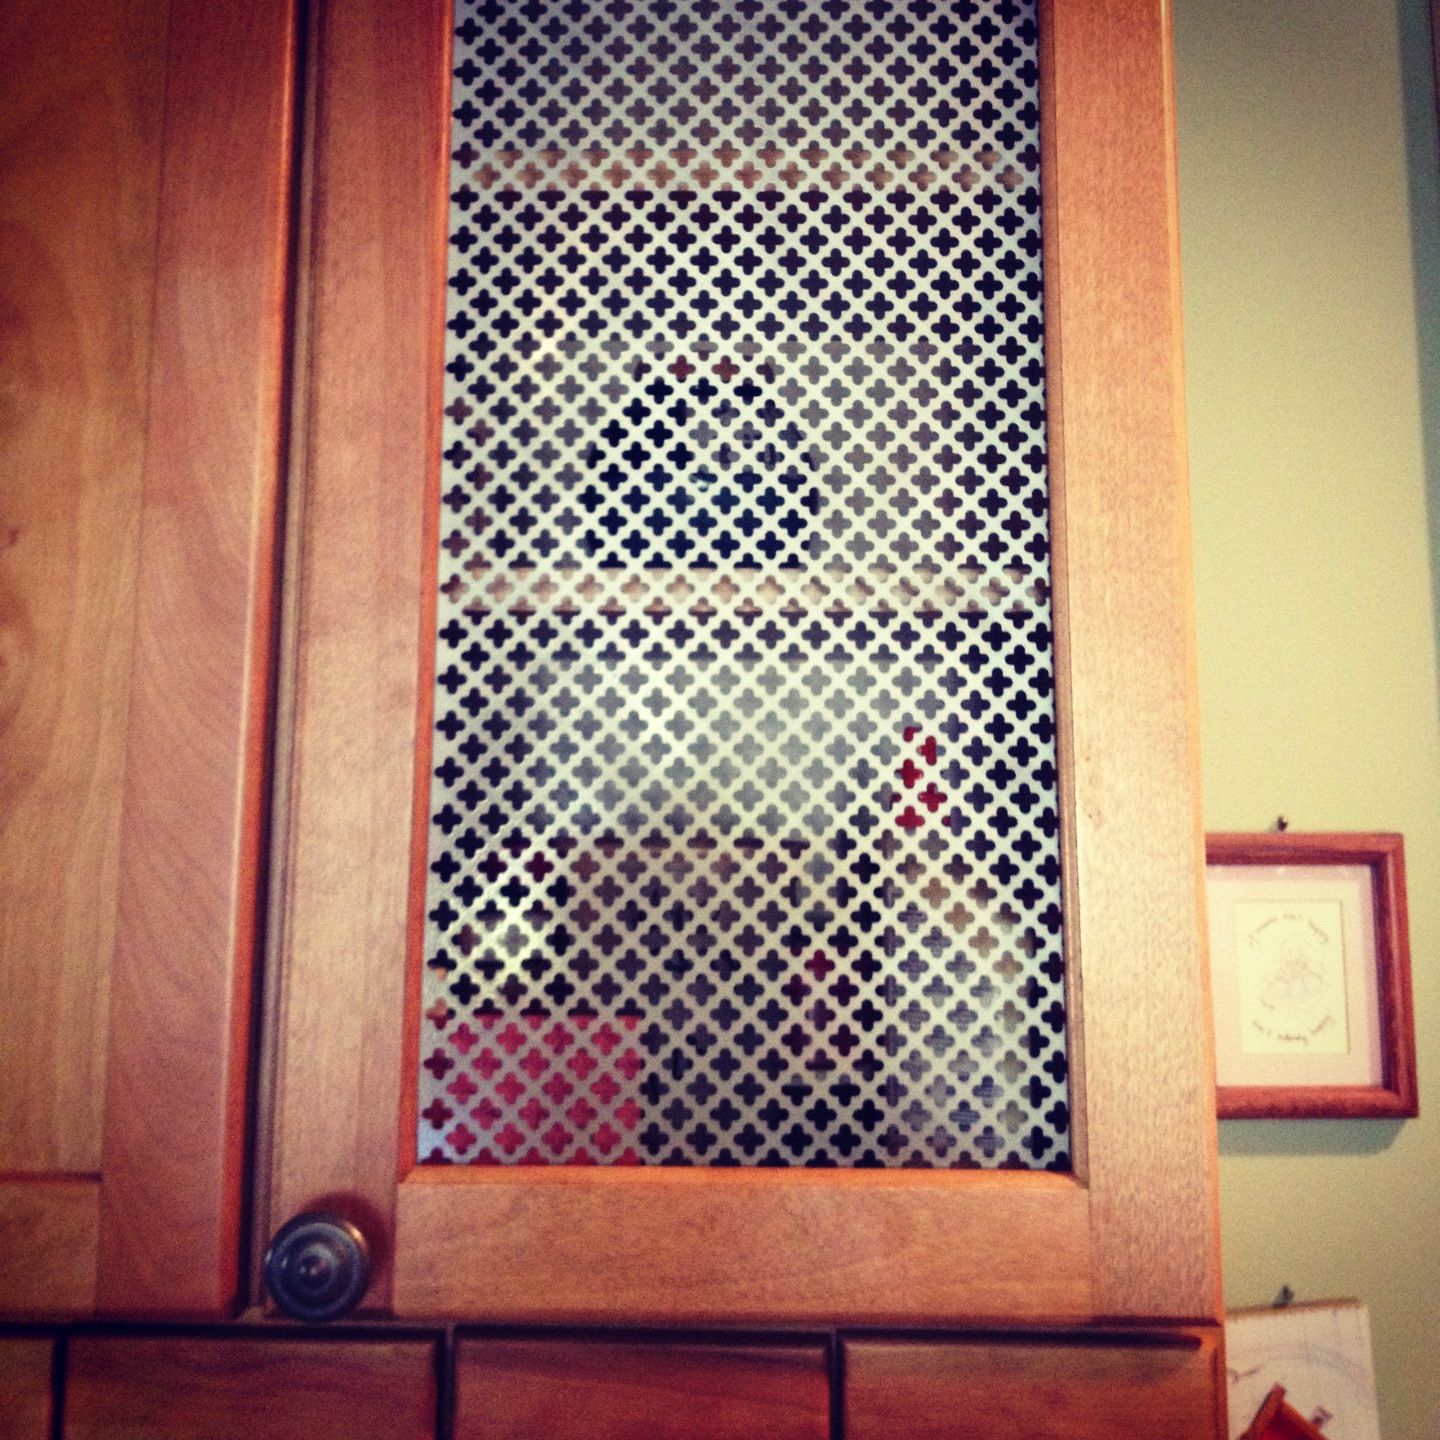 DIY cabinet grate made from a radiator cover that was spray painted ...